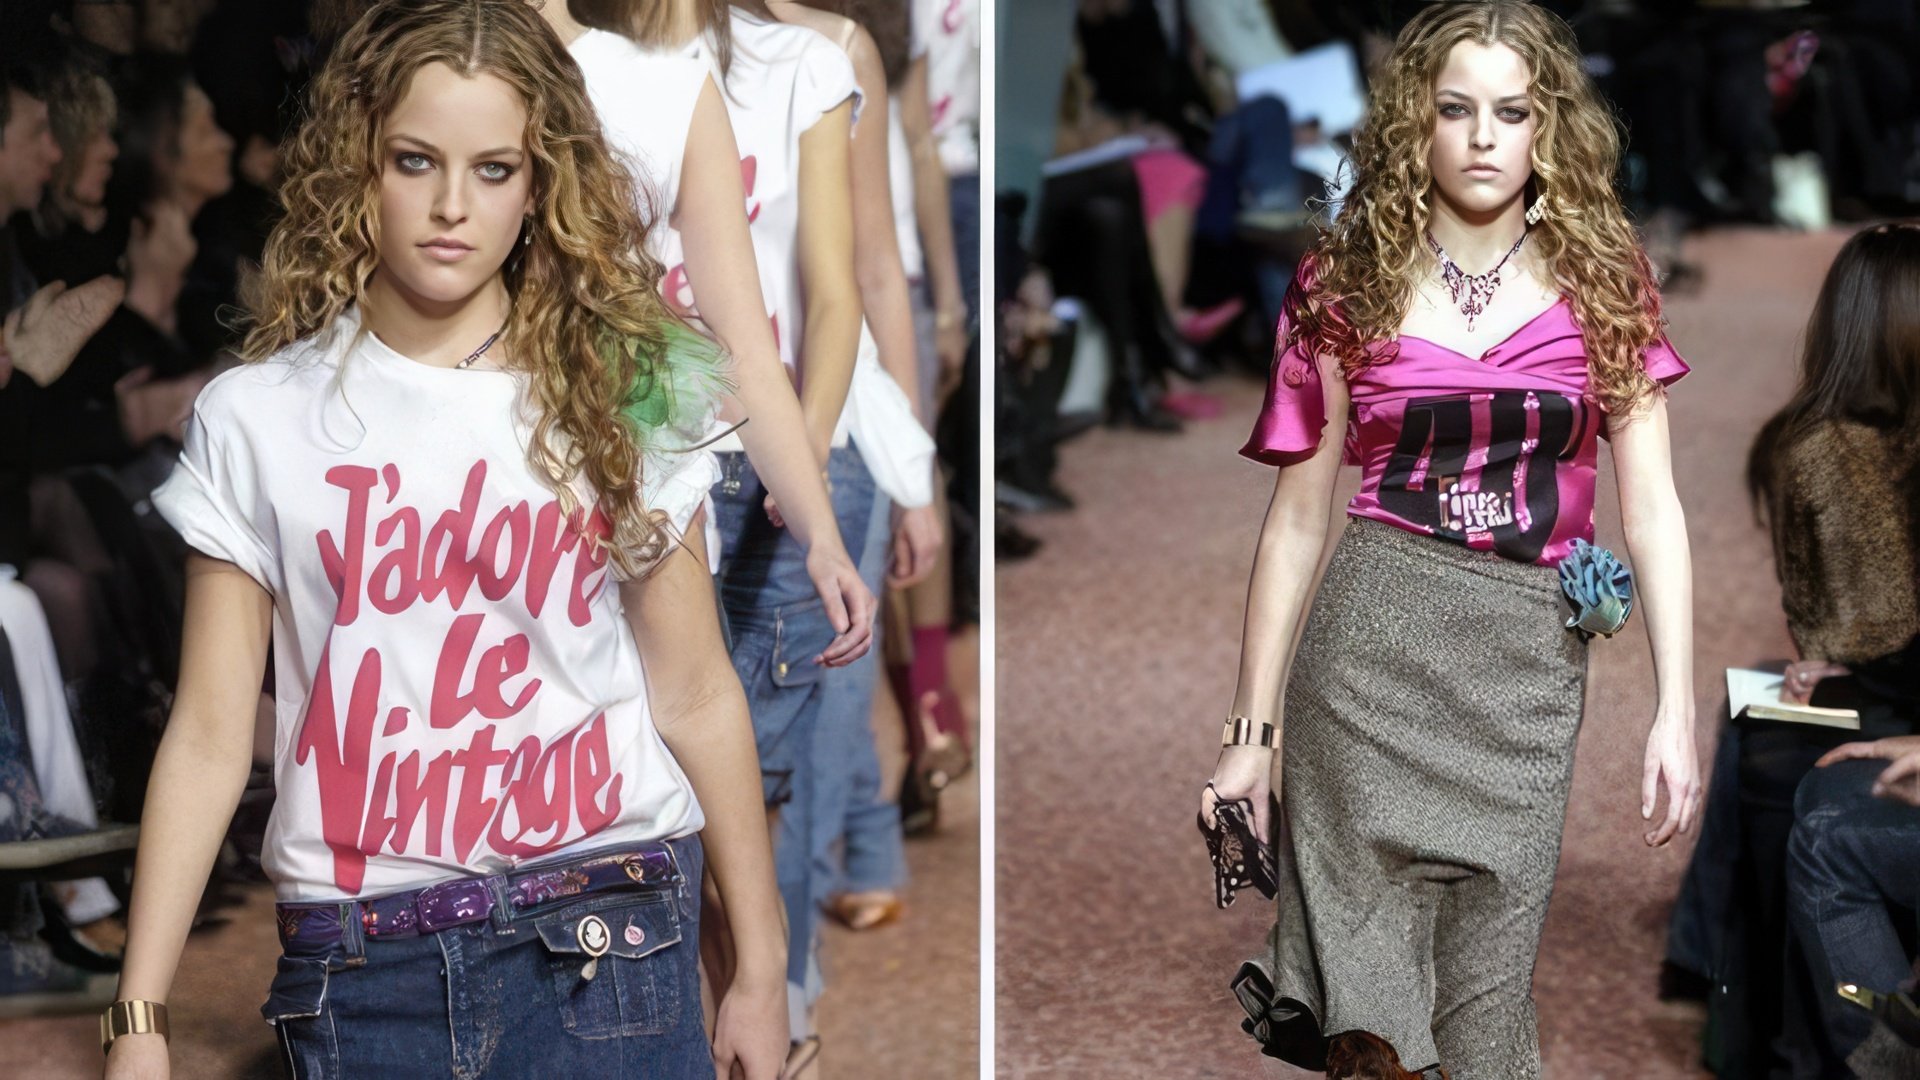 15-year-old Riley Keough on the catwalk since 15 of age